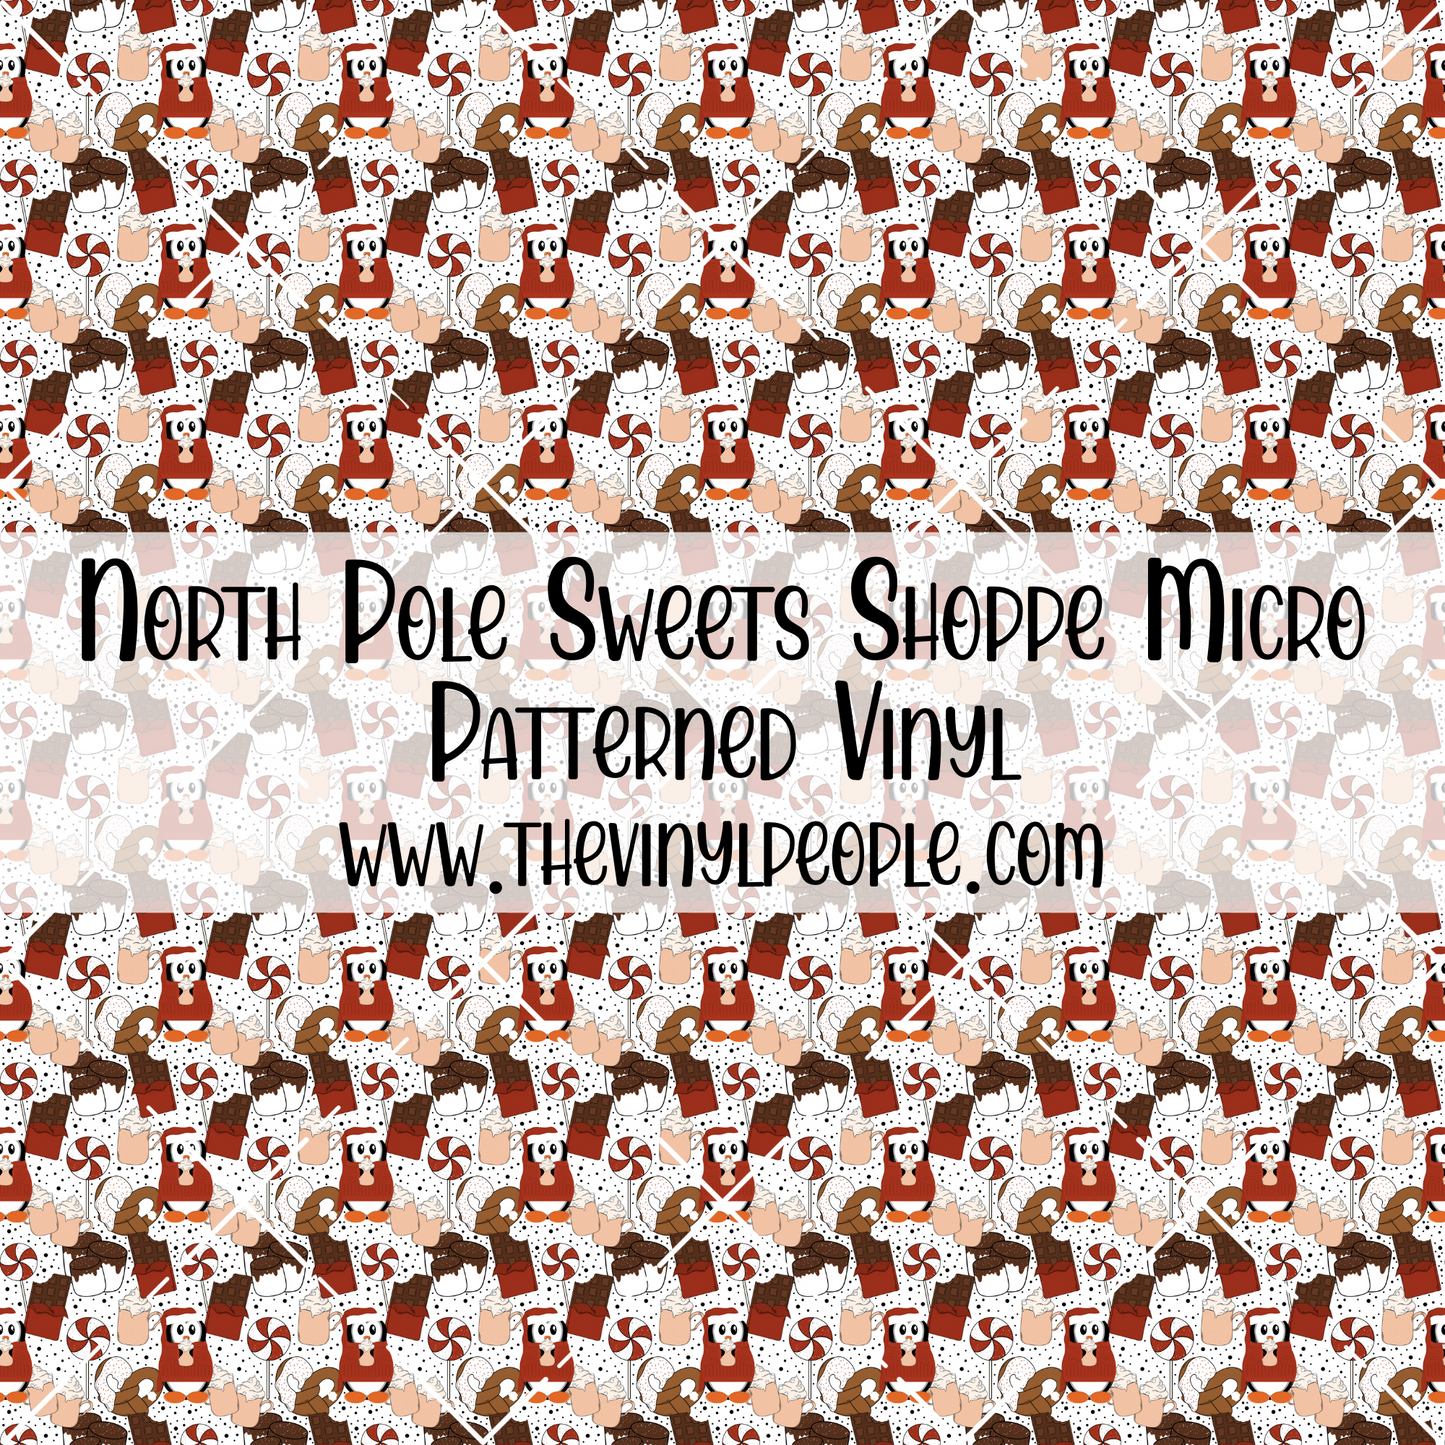 North Pole Sweets Shoppe Patterned Vinyl